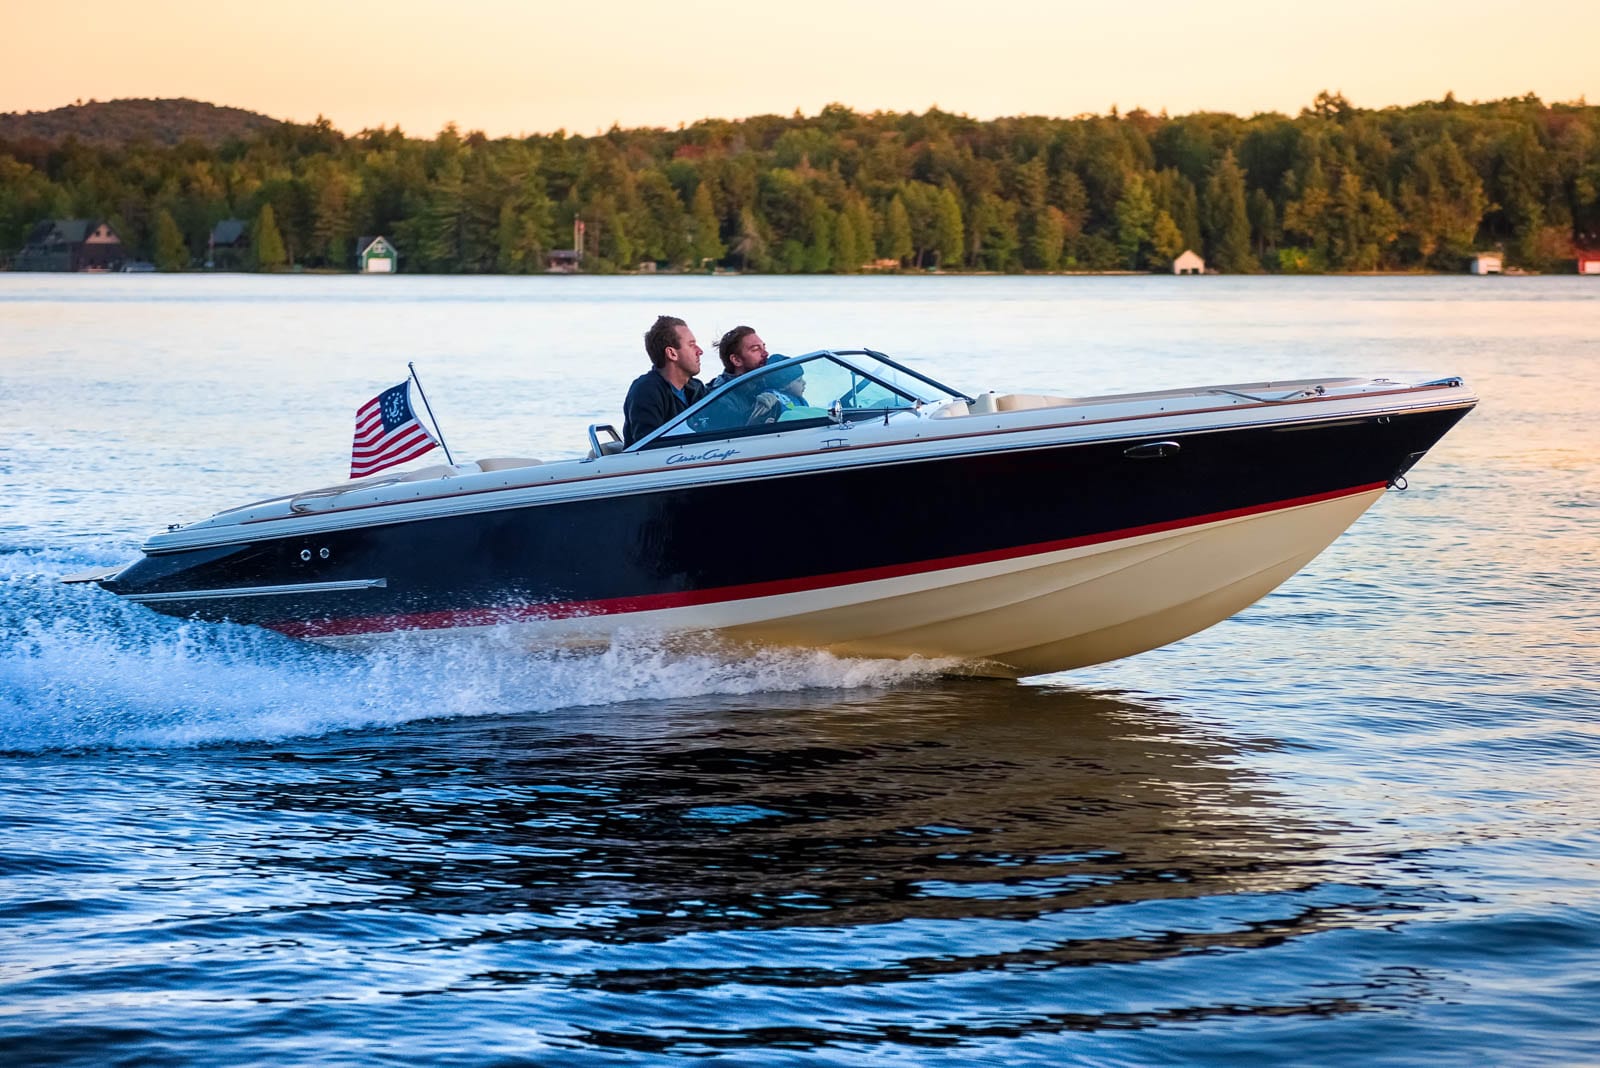 Two people are driving a speed boat on the water.